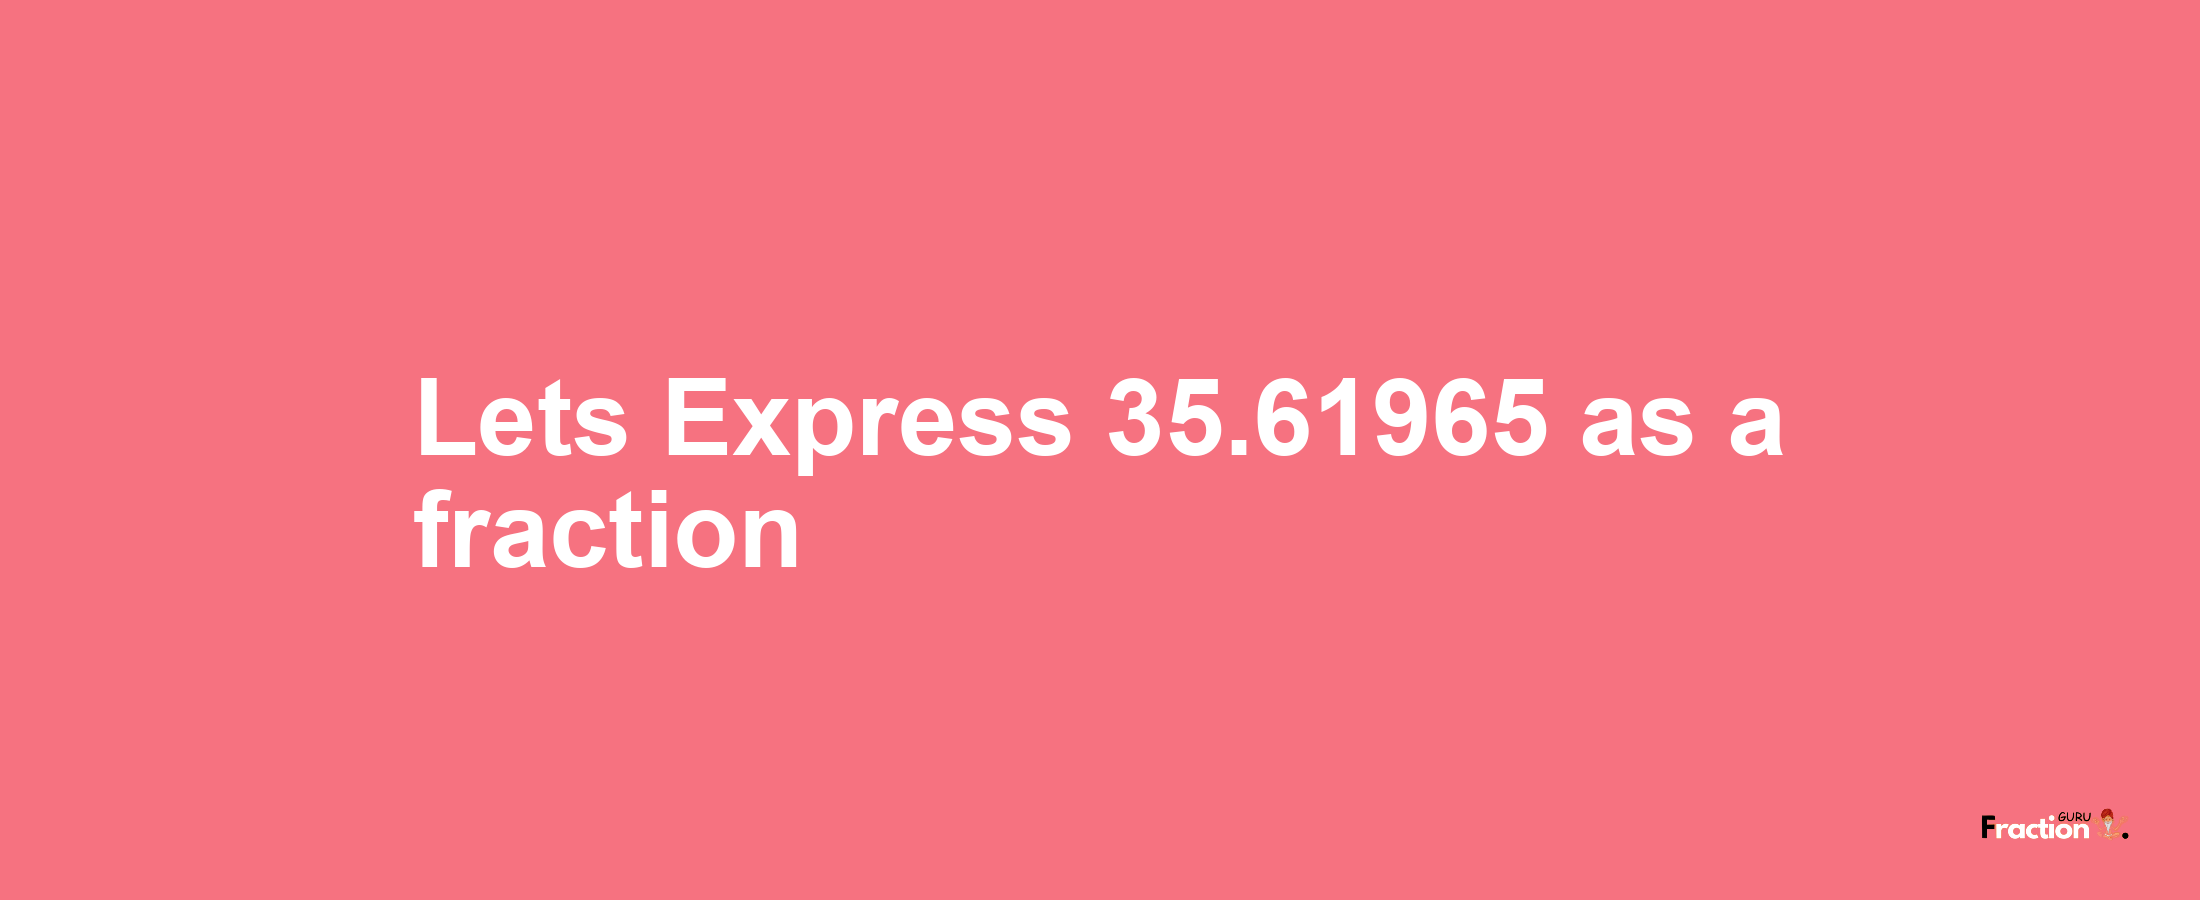 Lets Express 35.61965 as afraction